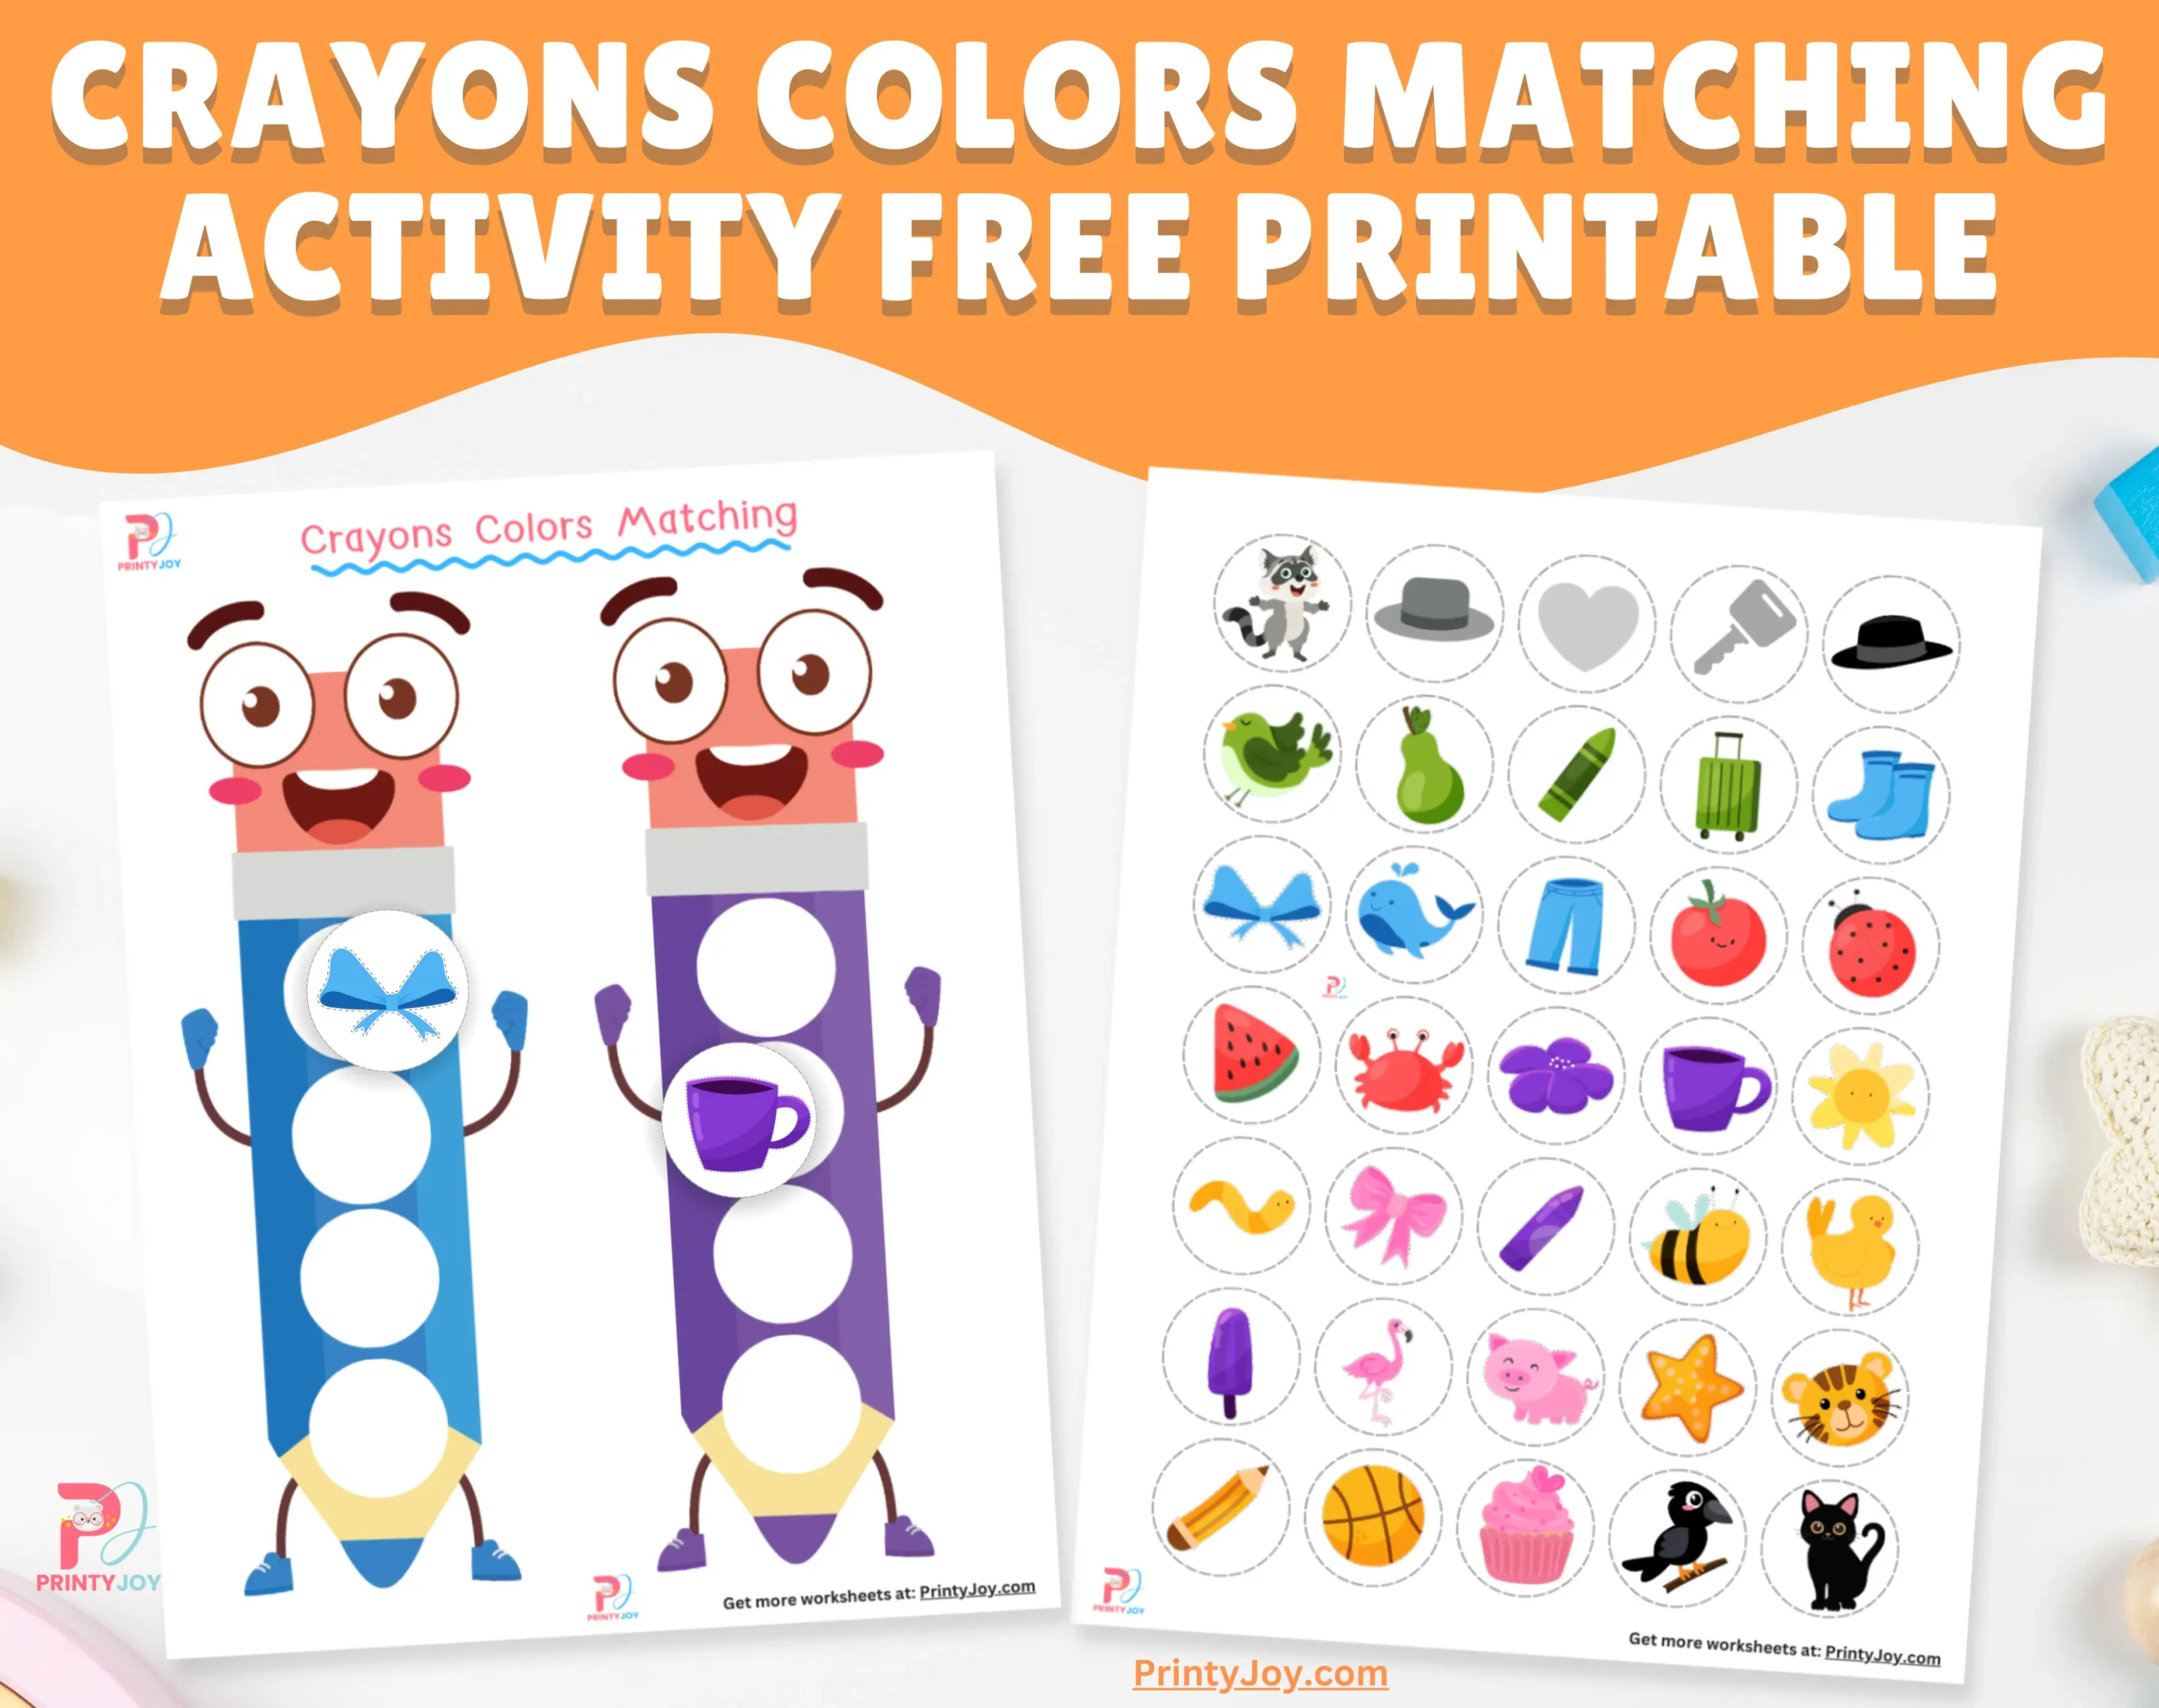 Crayons Colors Matching Activity Free Printable